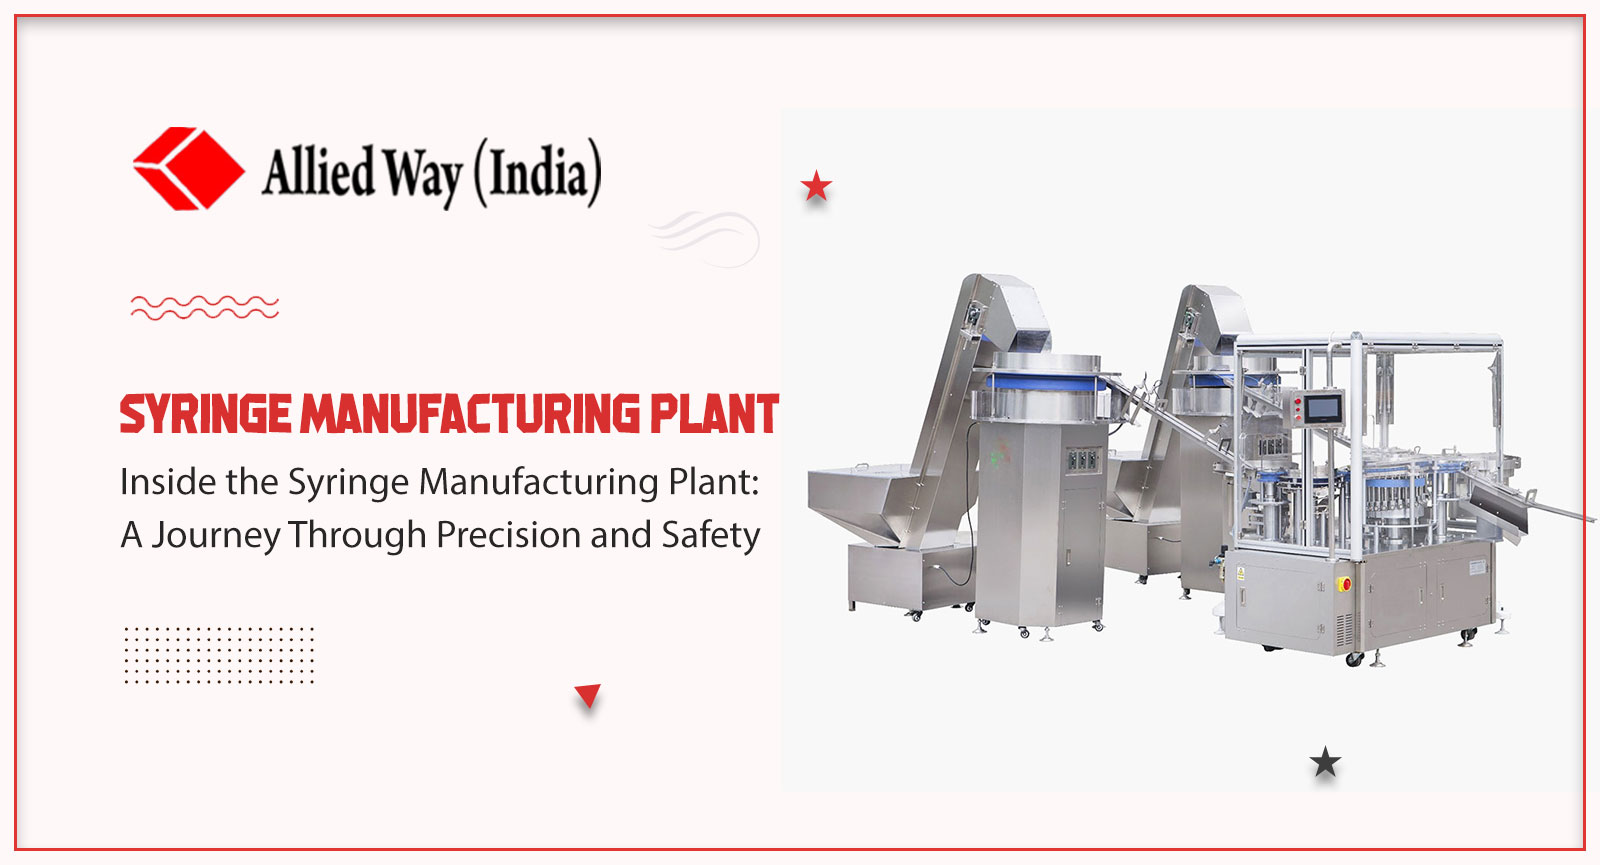 Inside the Syringe Manufacturing Plant: A Journey Through Precision and Safety, Allied Way (India)